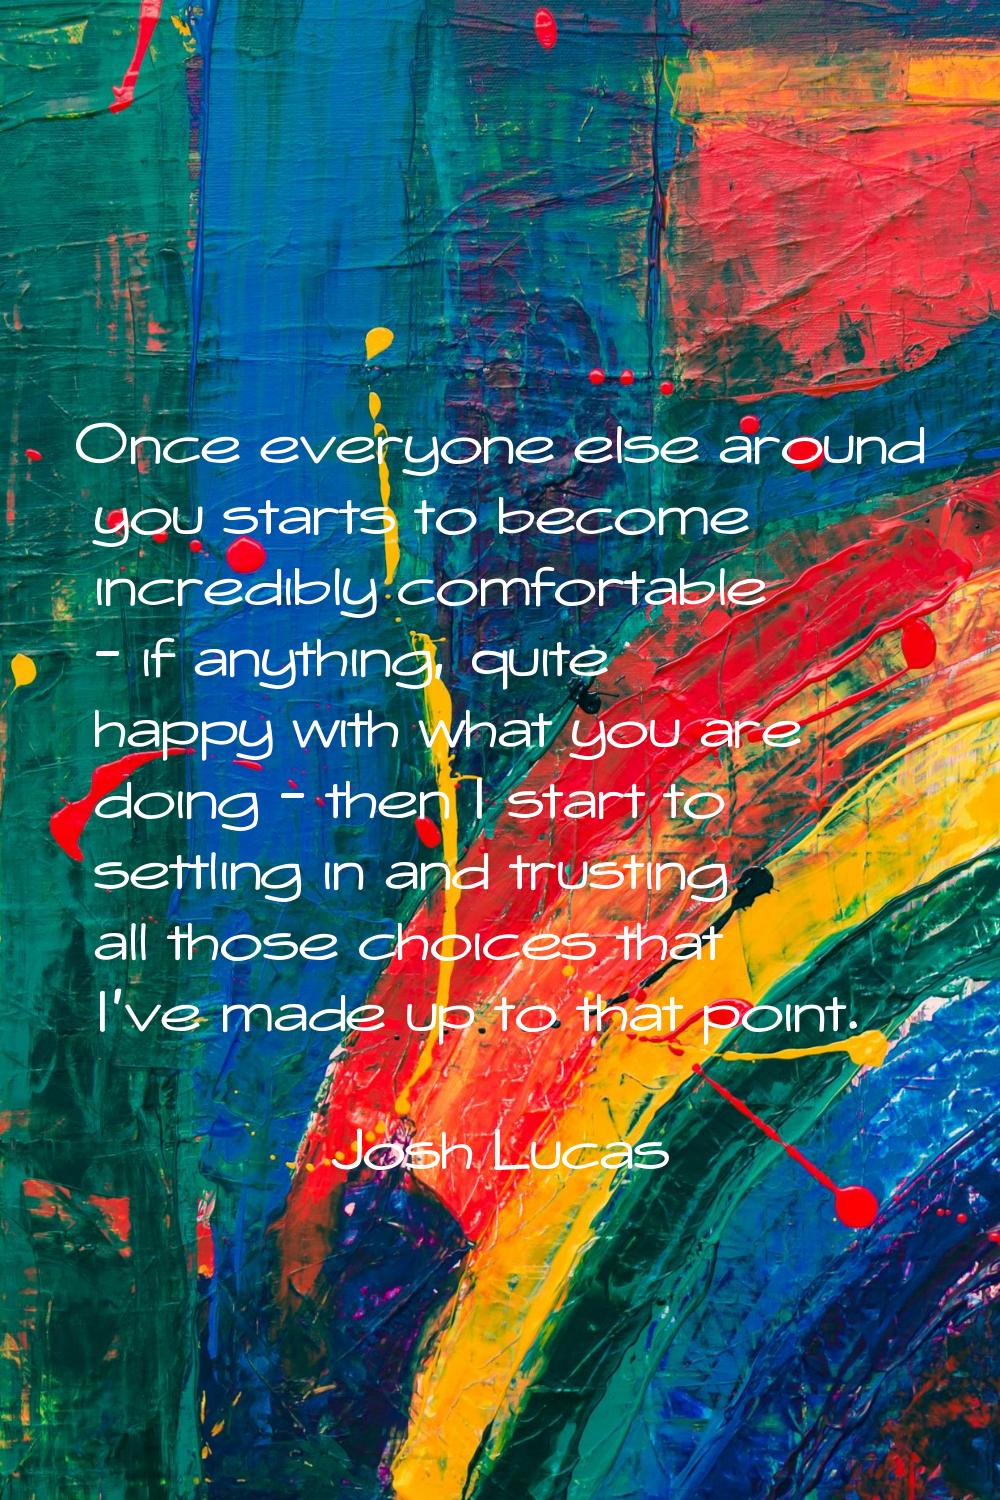 Once everyone else around you starts to become incredibly comfortable - if anything, quite happy wi